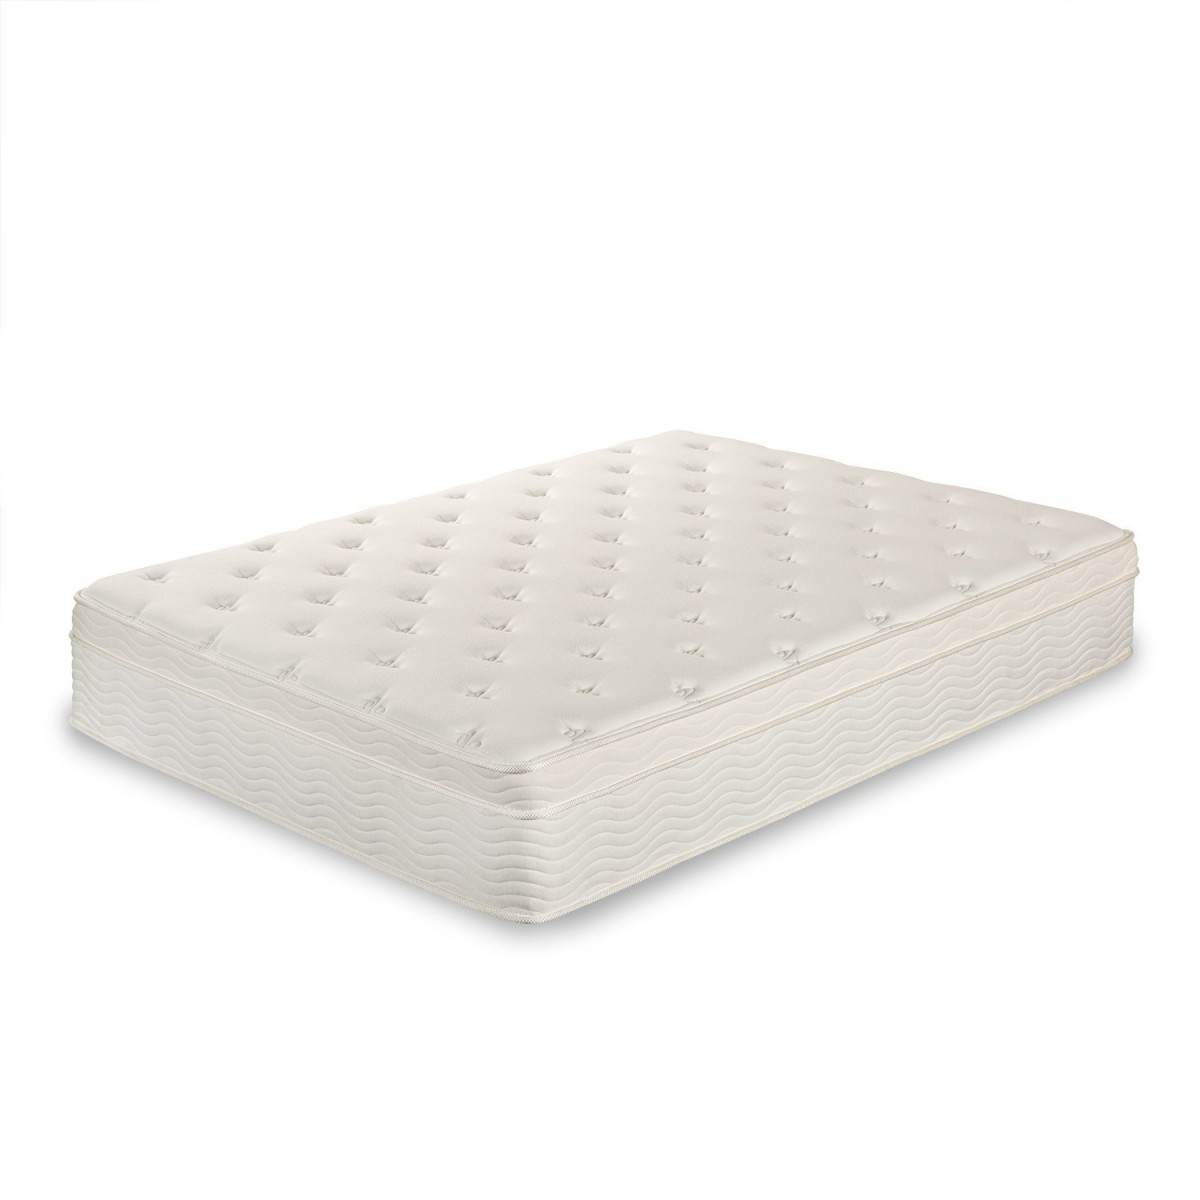 Zinus Night Therapy Spring Deluxe Euro Box Top Spring Mattress review